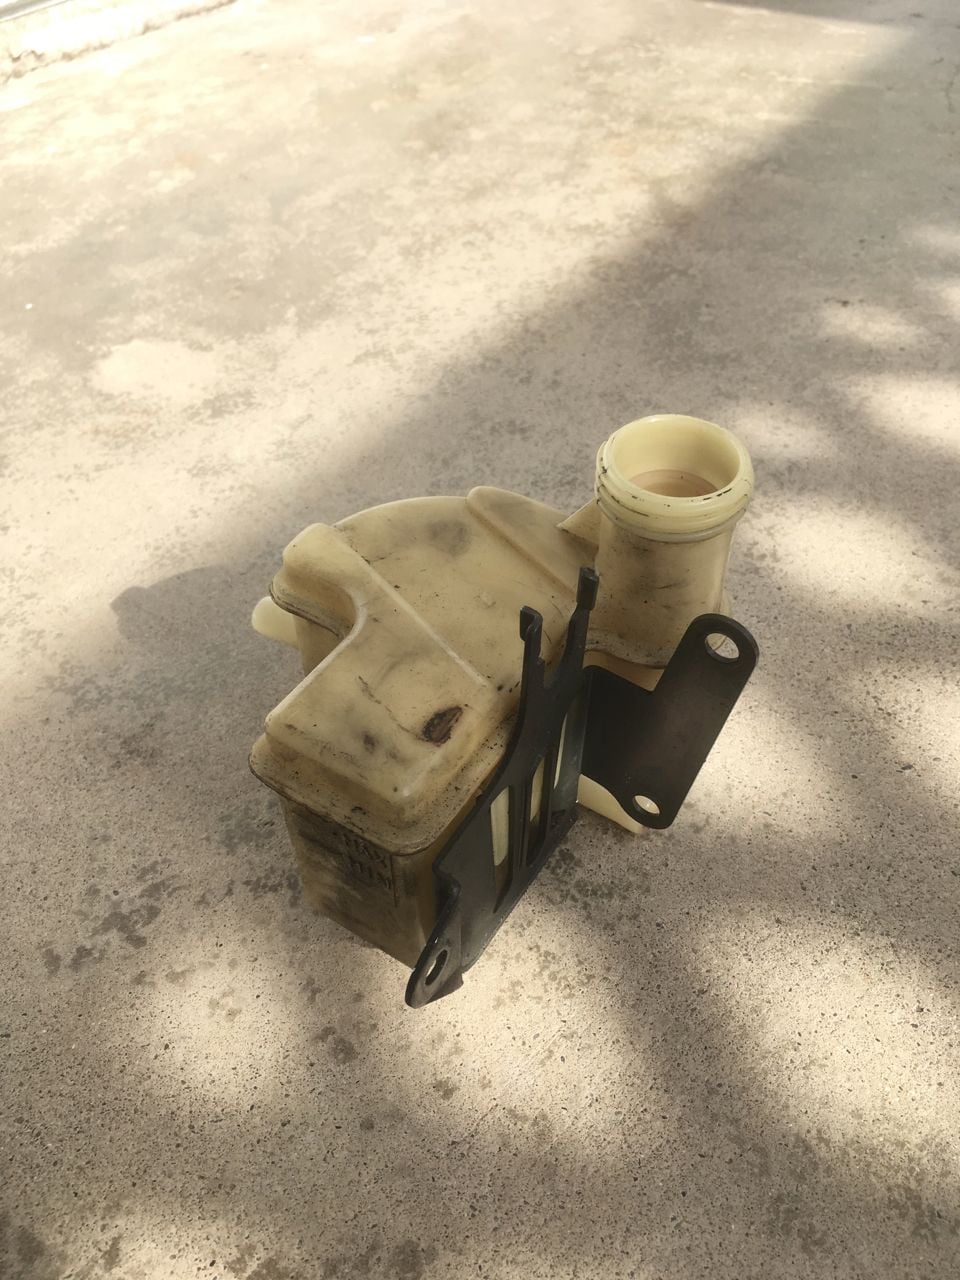 1993 Mazda RX-7 - power steering tank - Engine - Complete - $20 - Seal Beach, CA 90740, United States